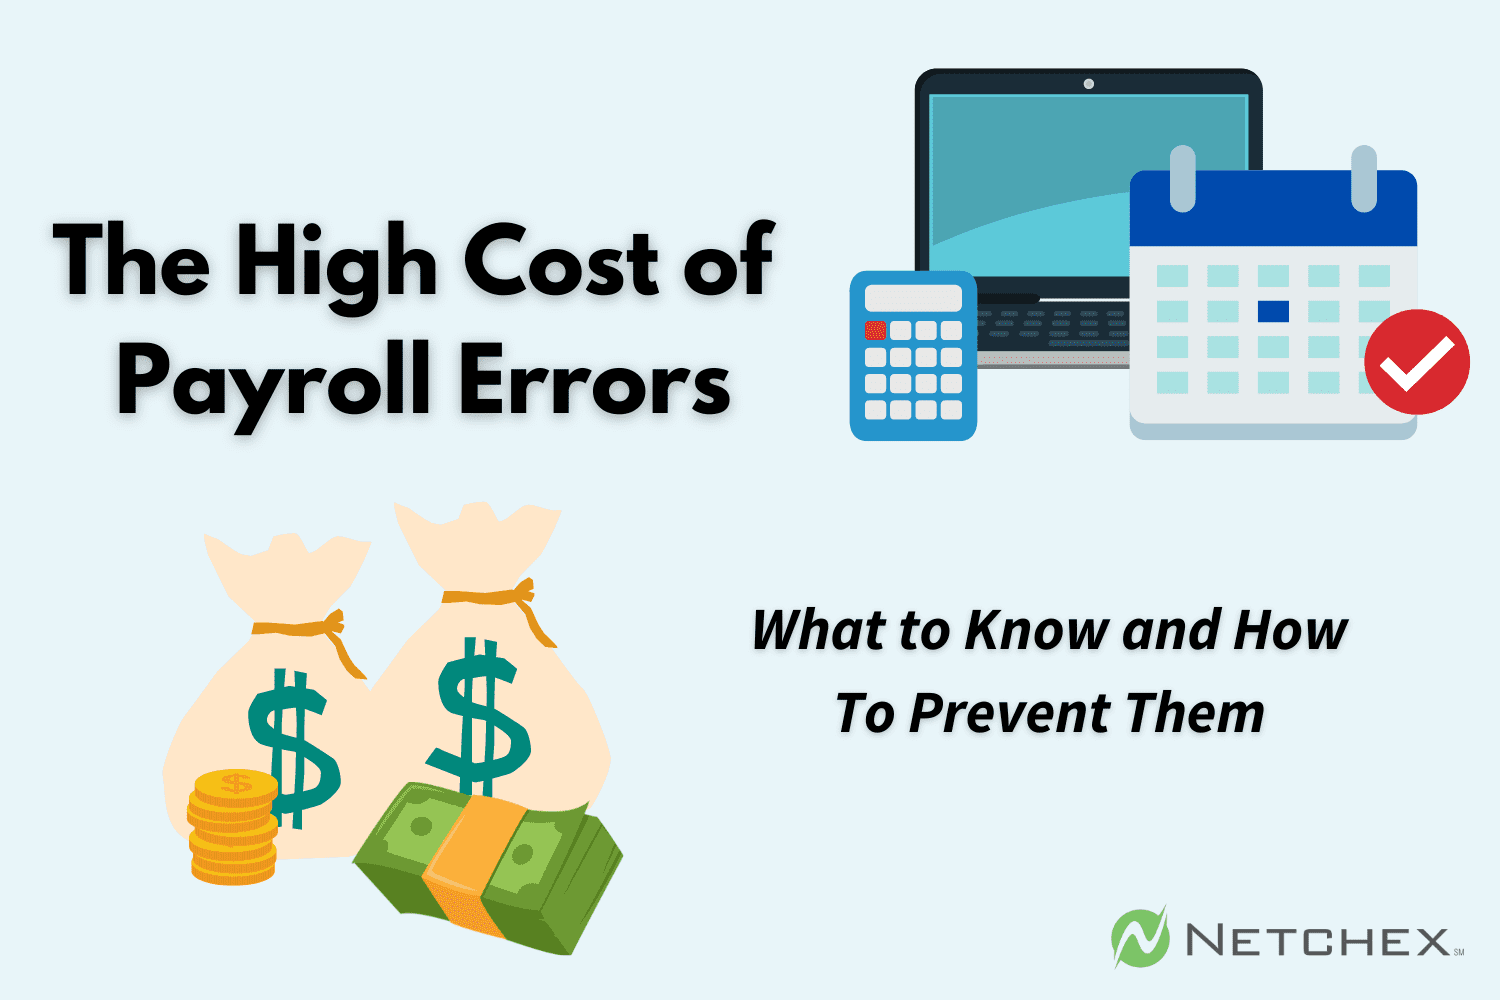 The High Cost of Payroll Errors: What to Know and How to Prevent Them